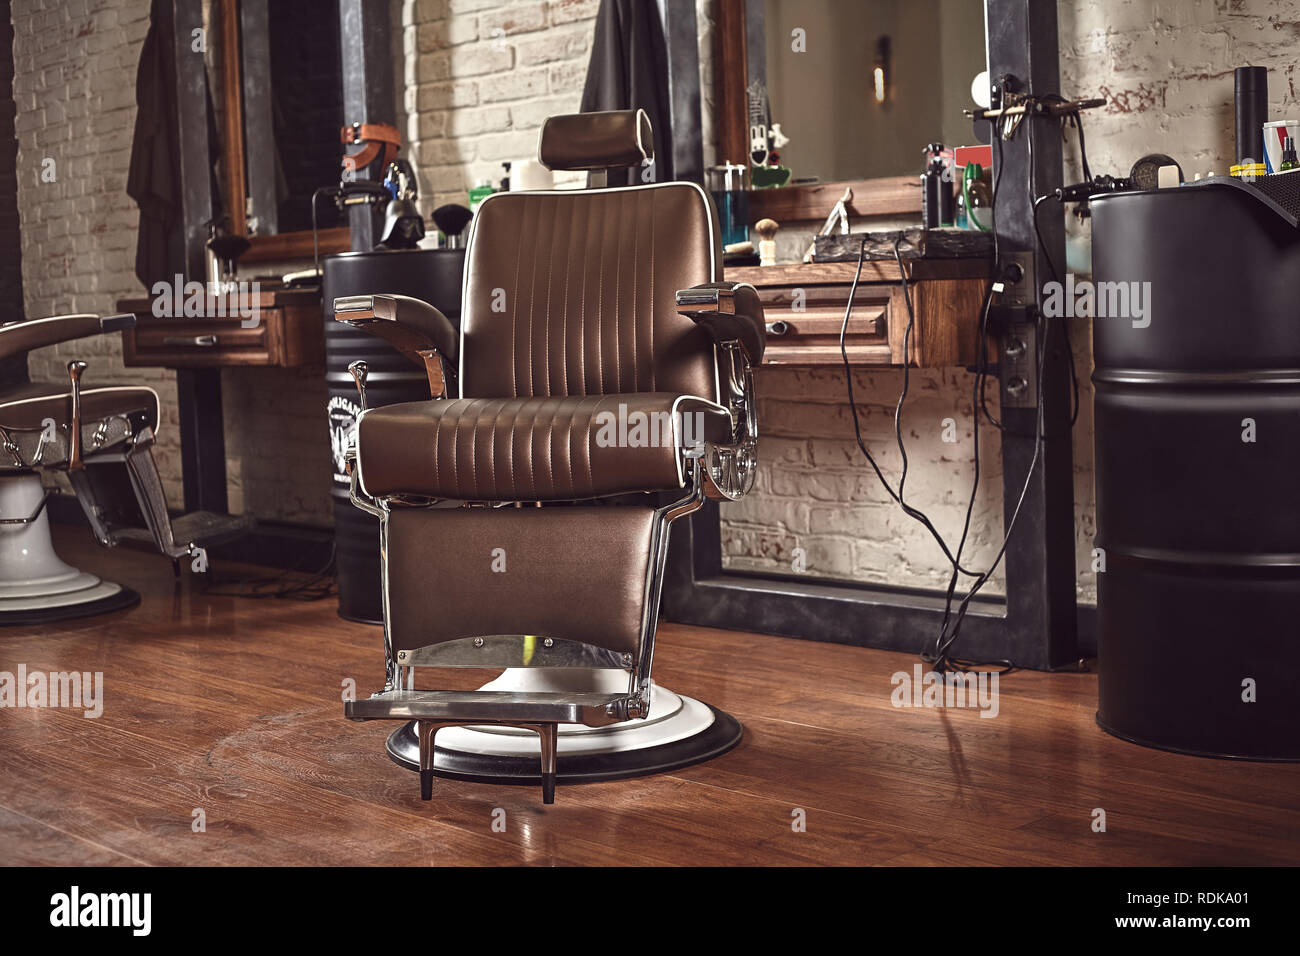 Barber/Stylist T.Money on X: Brown LV #Barber #salon #hair cutting and  #styling #Barbercape 55”X60”    / X